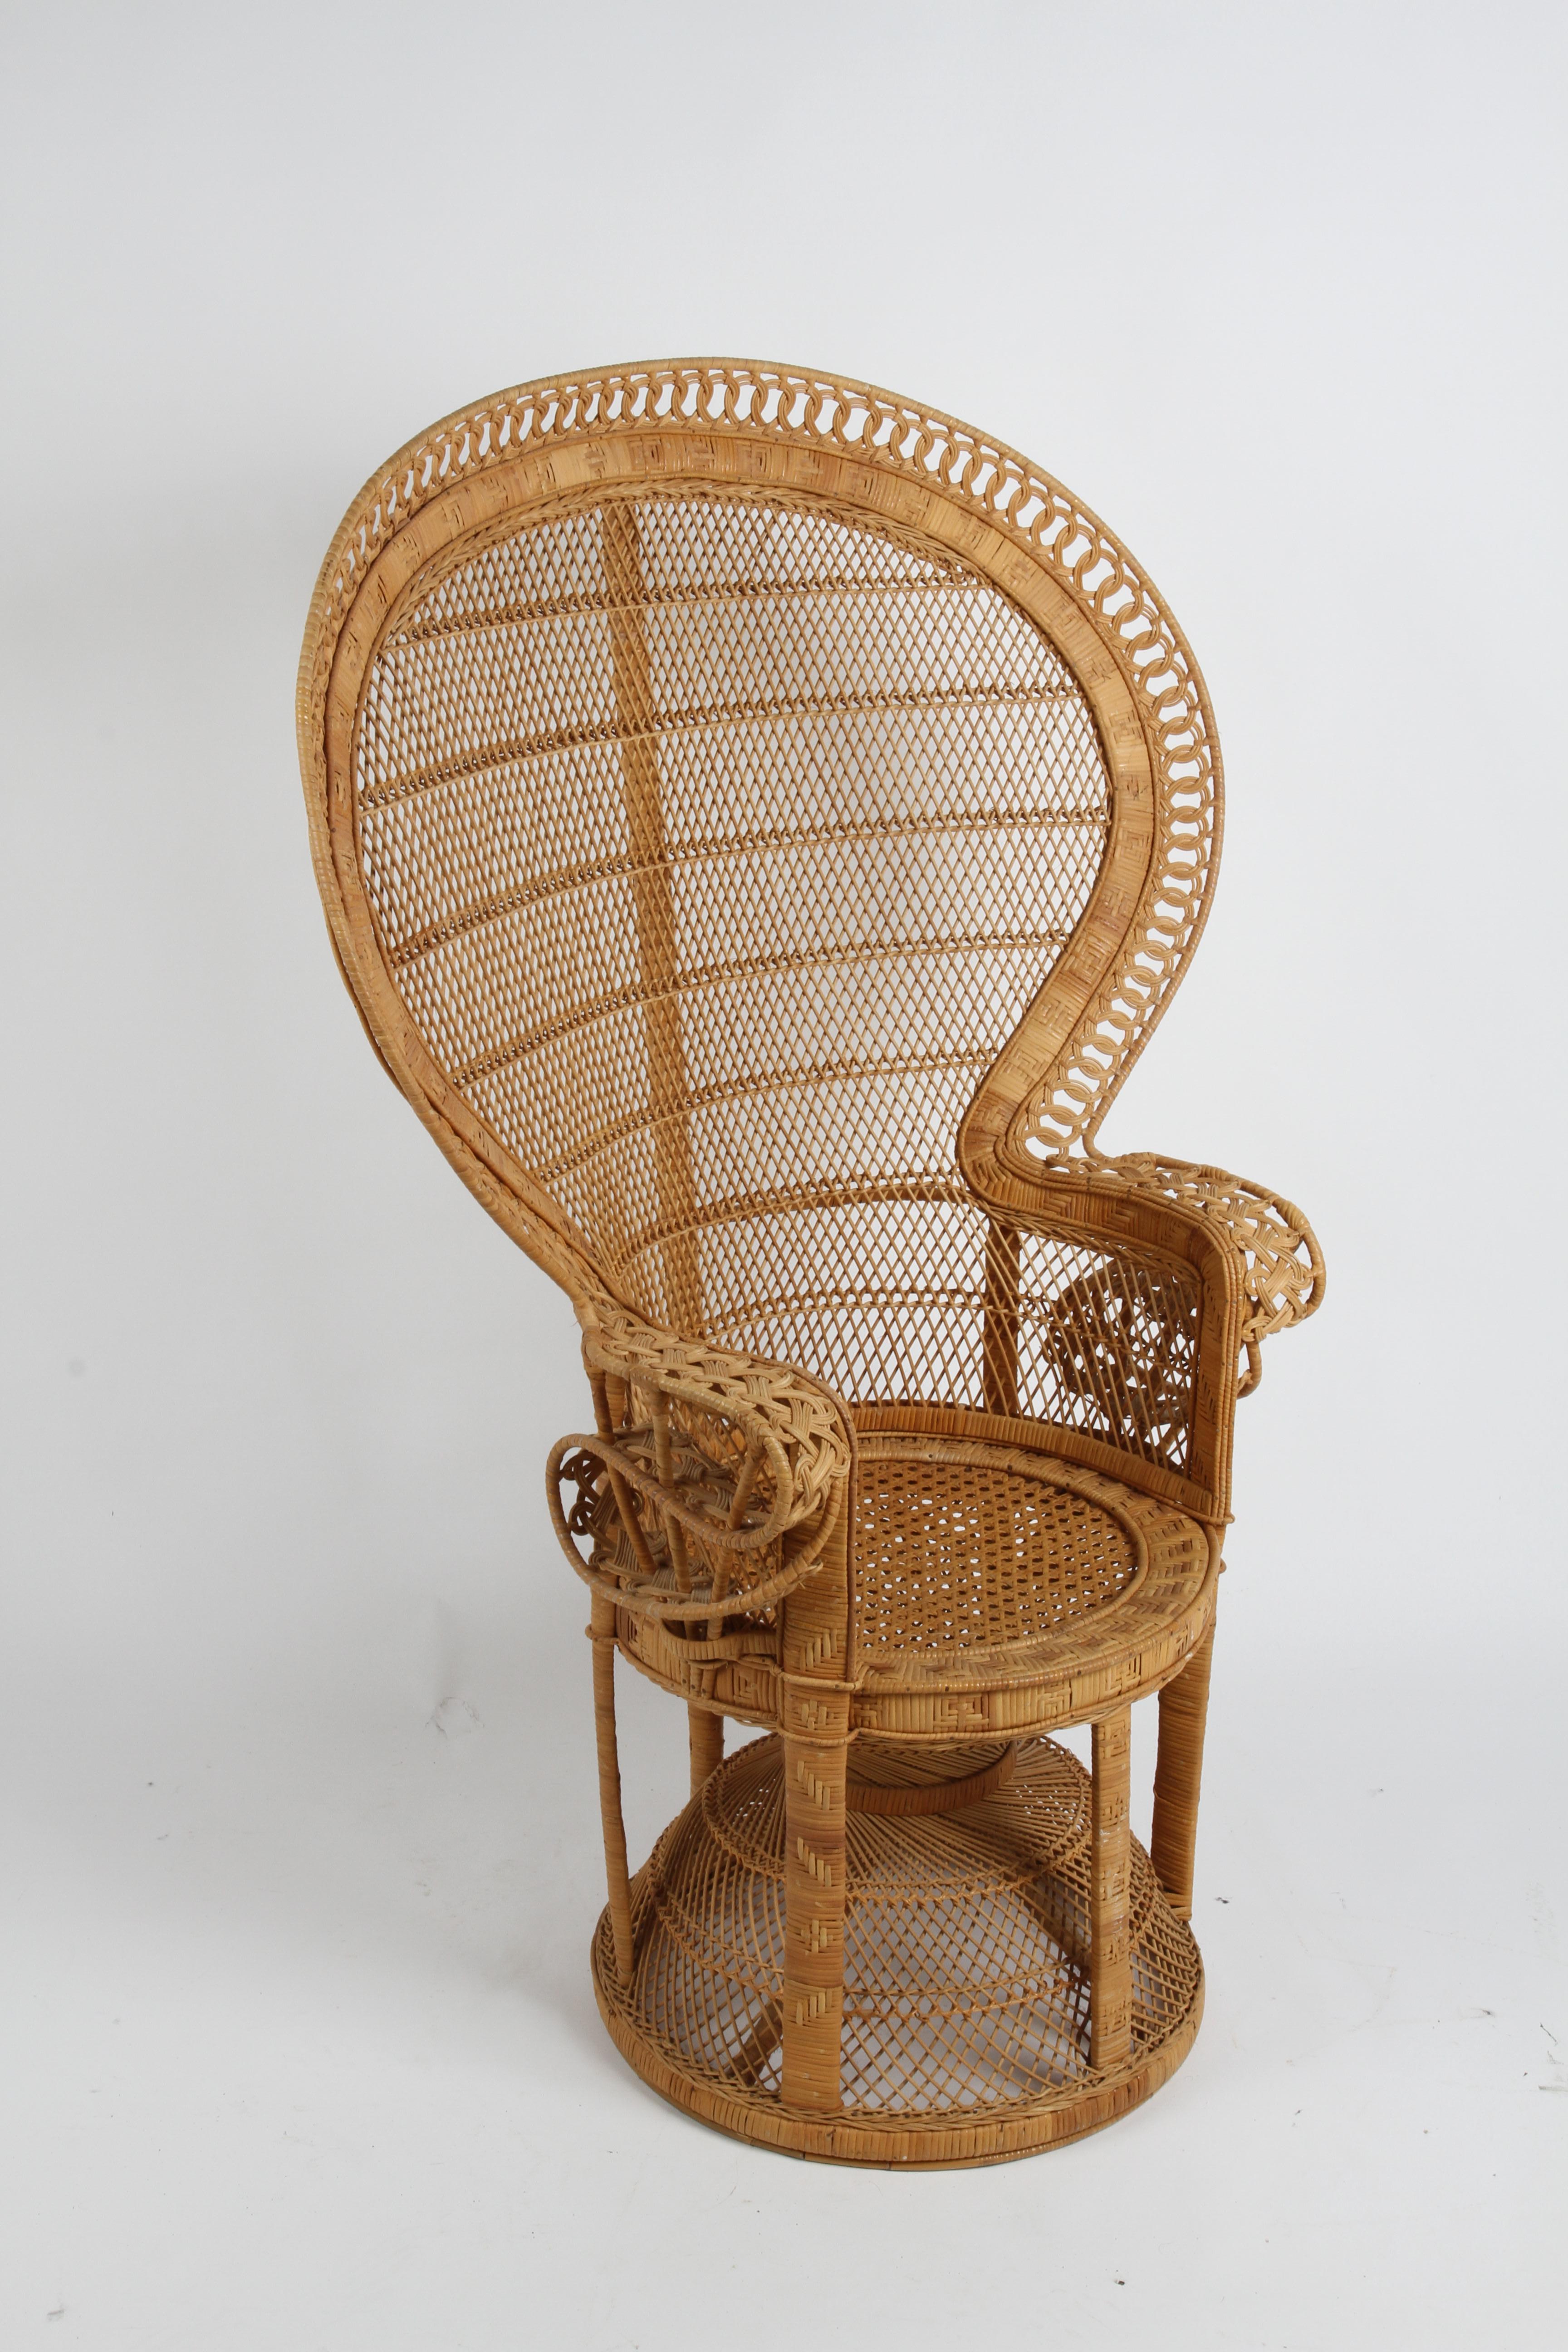 Vintage 1970s Rattan & Wicker Handcrafted Boho Chic Emmanuelle Peacock Chair For Sale 2